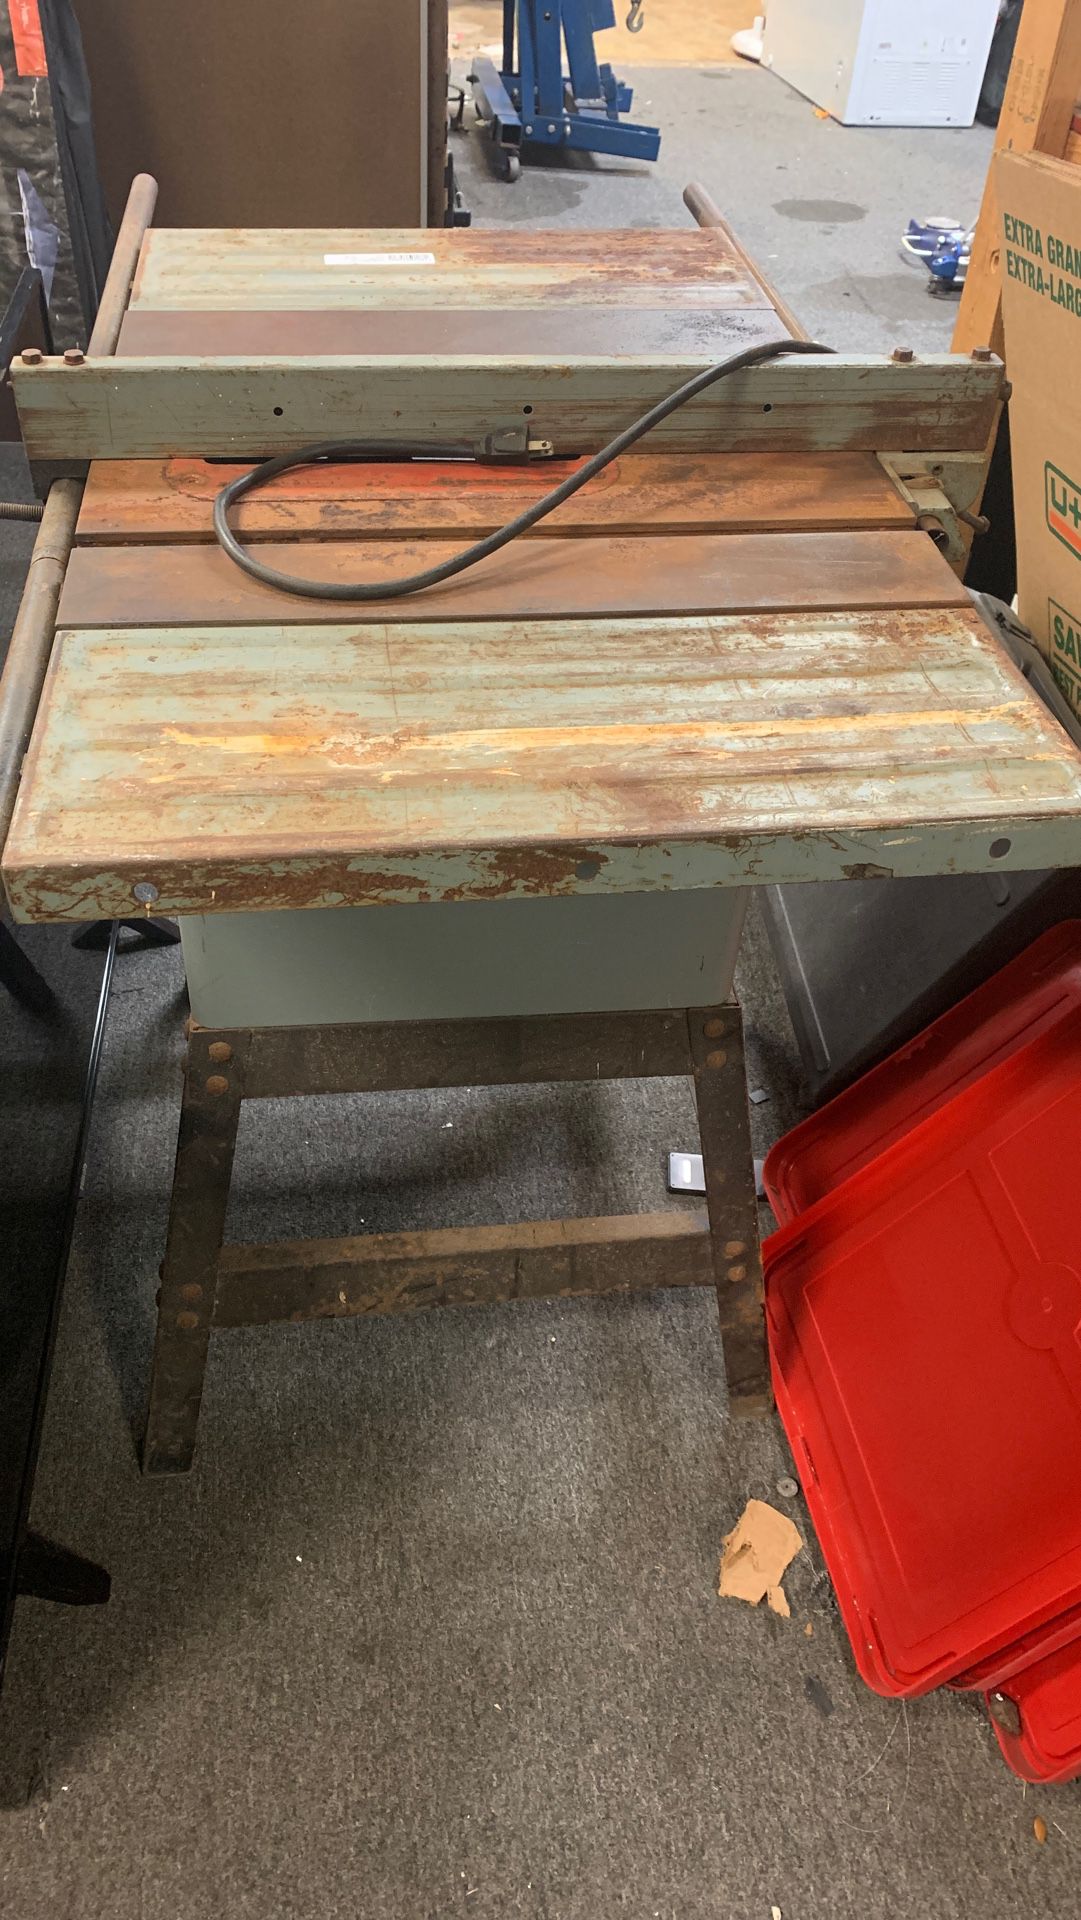 Delta table saw with stand